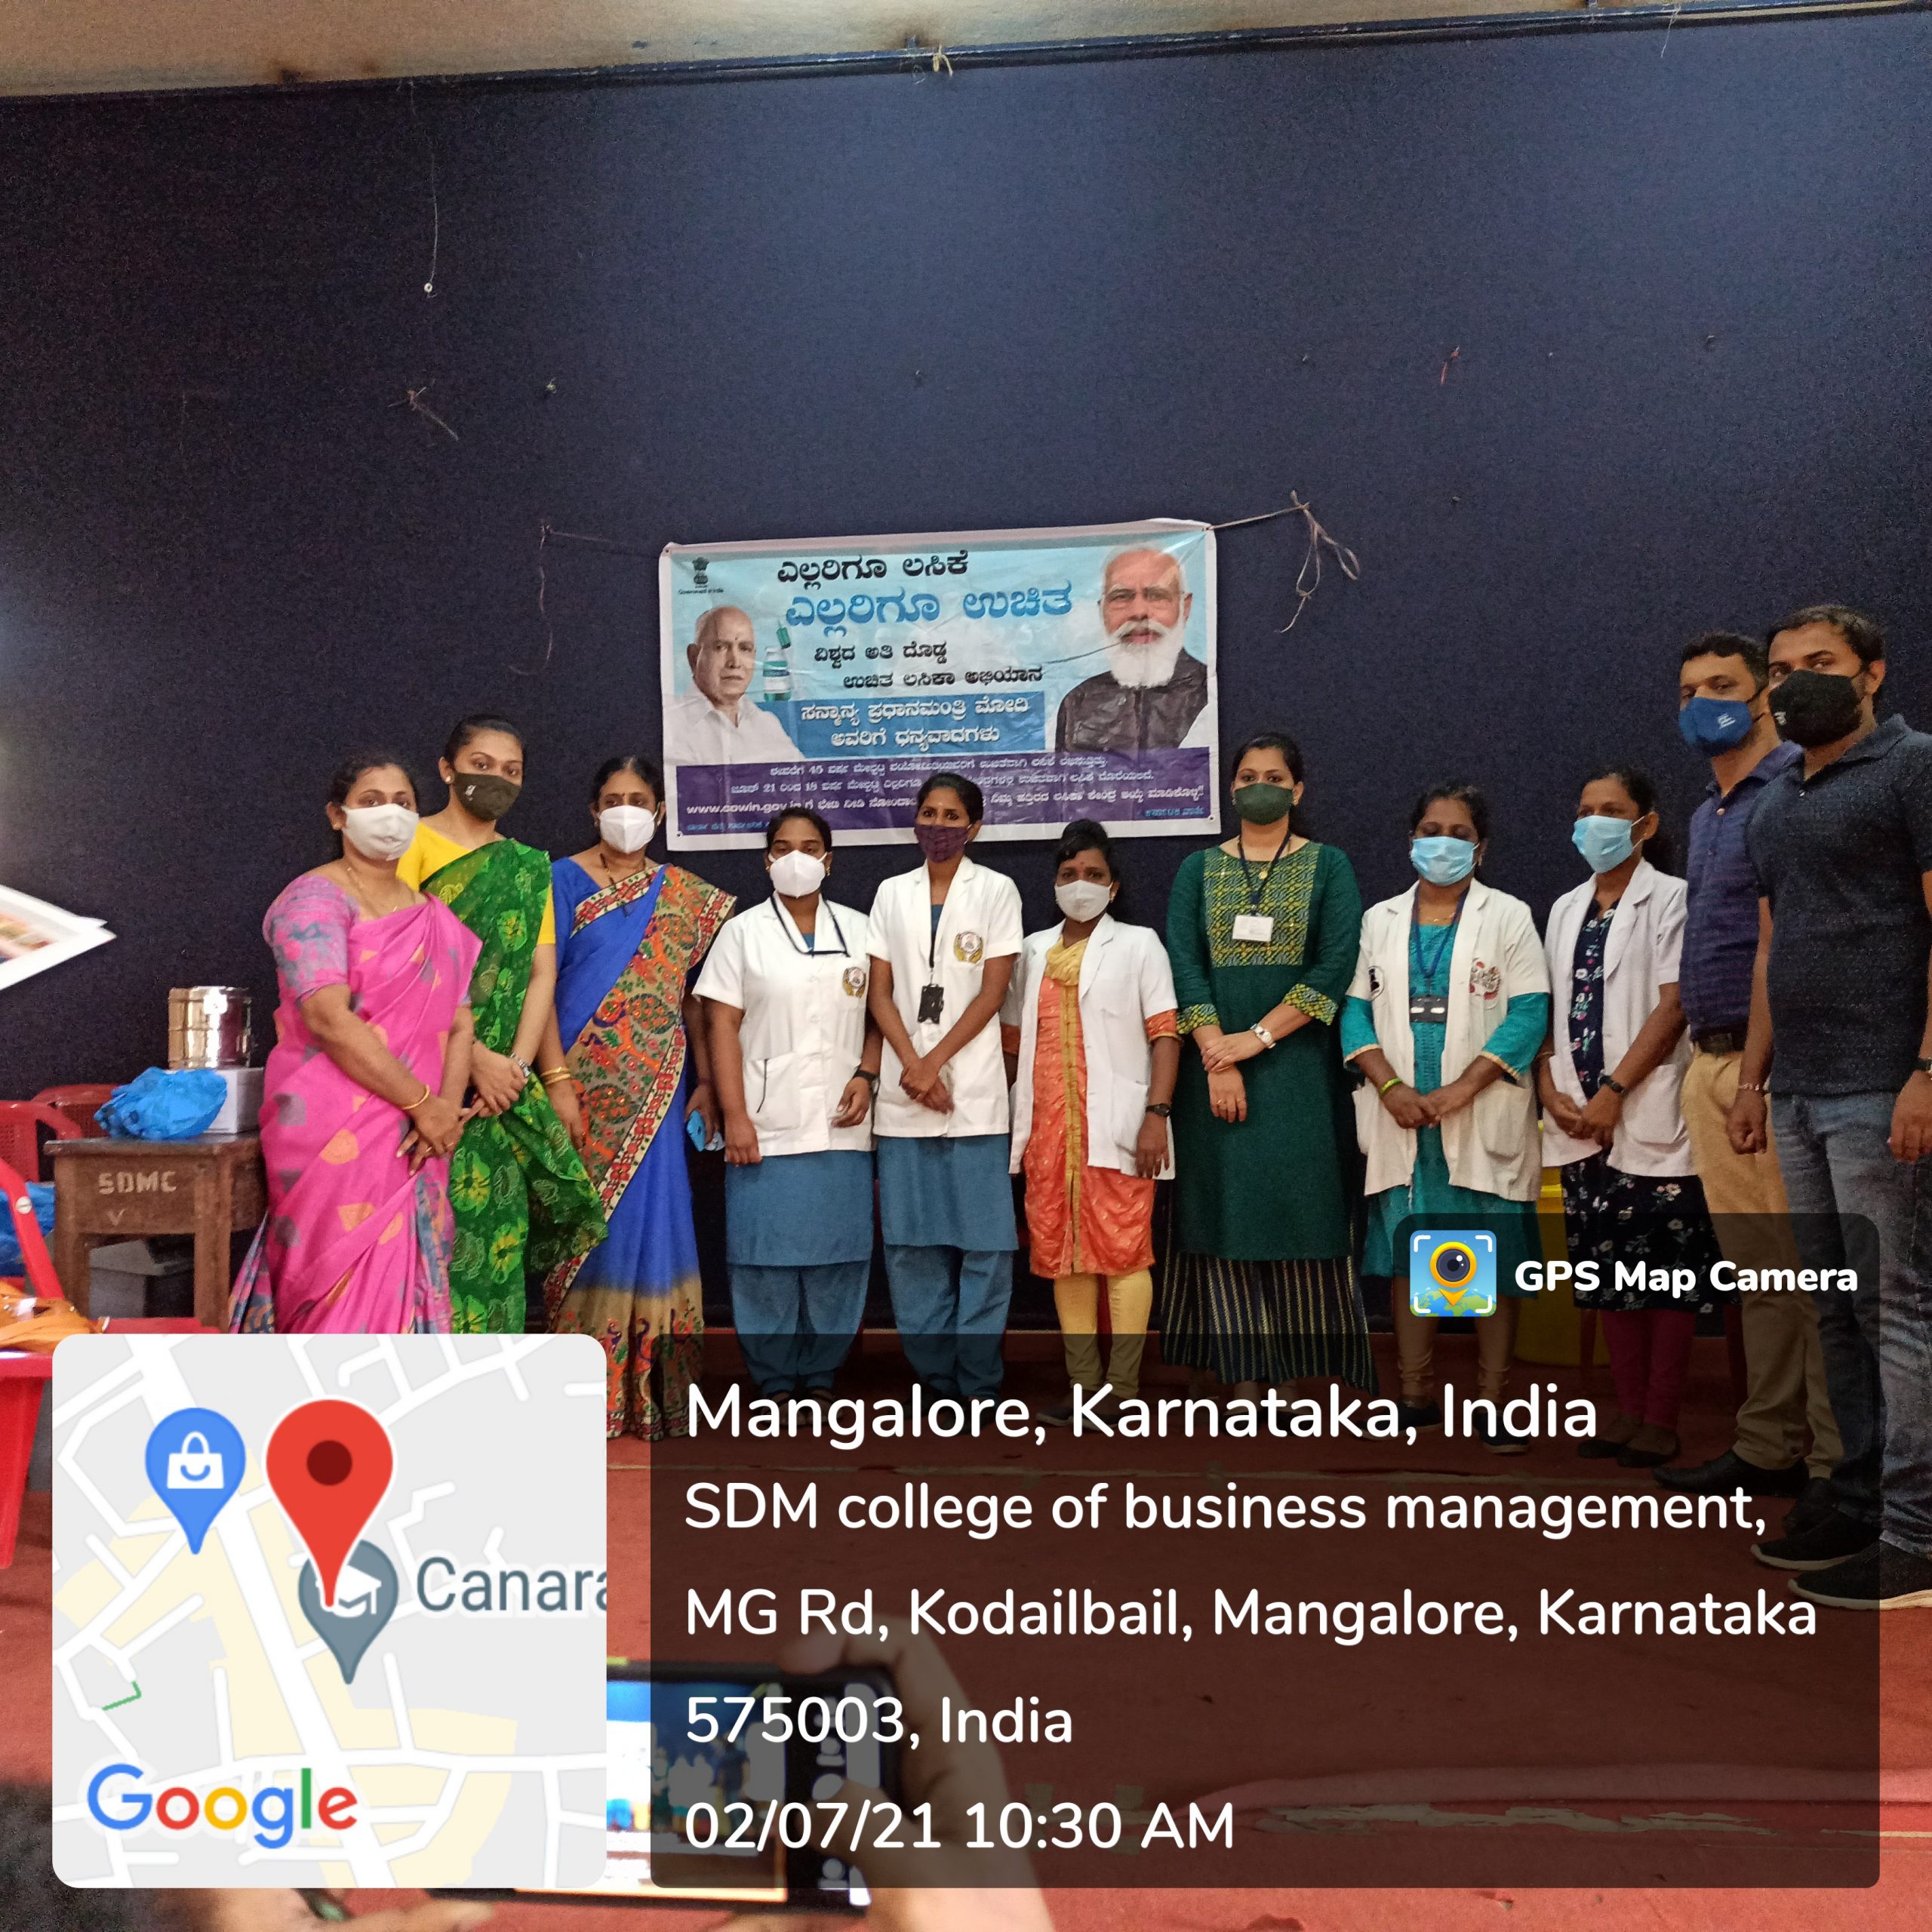 VACCINATION DRIVE AT SDM COLEGE OF BUSINESS MANAGEMENT